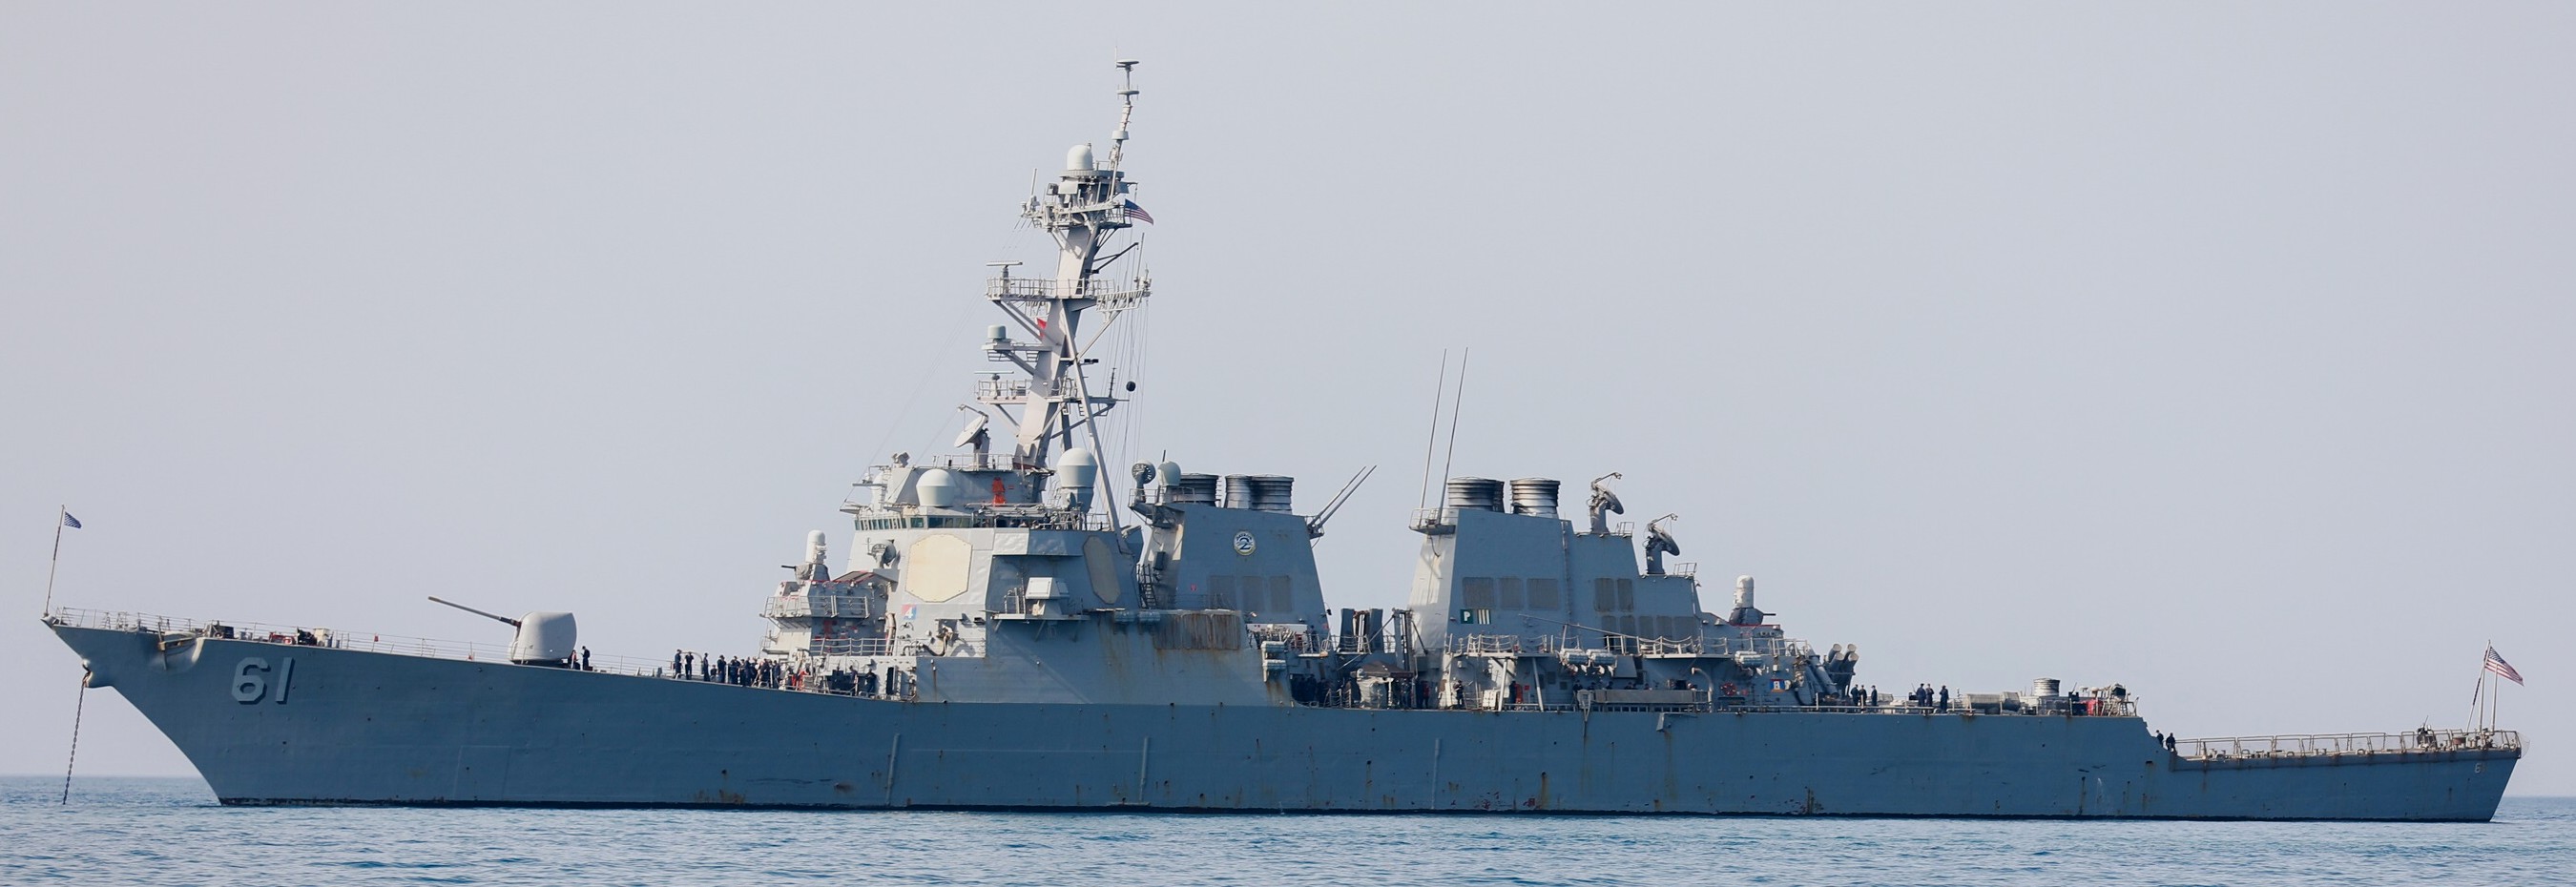 ddg-61 uss ramage guided missile destroyer arleigh burke class aegis us navy durres albania 117